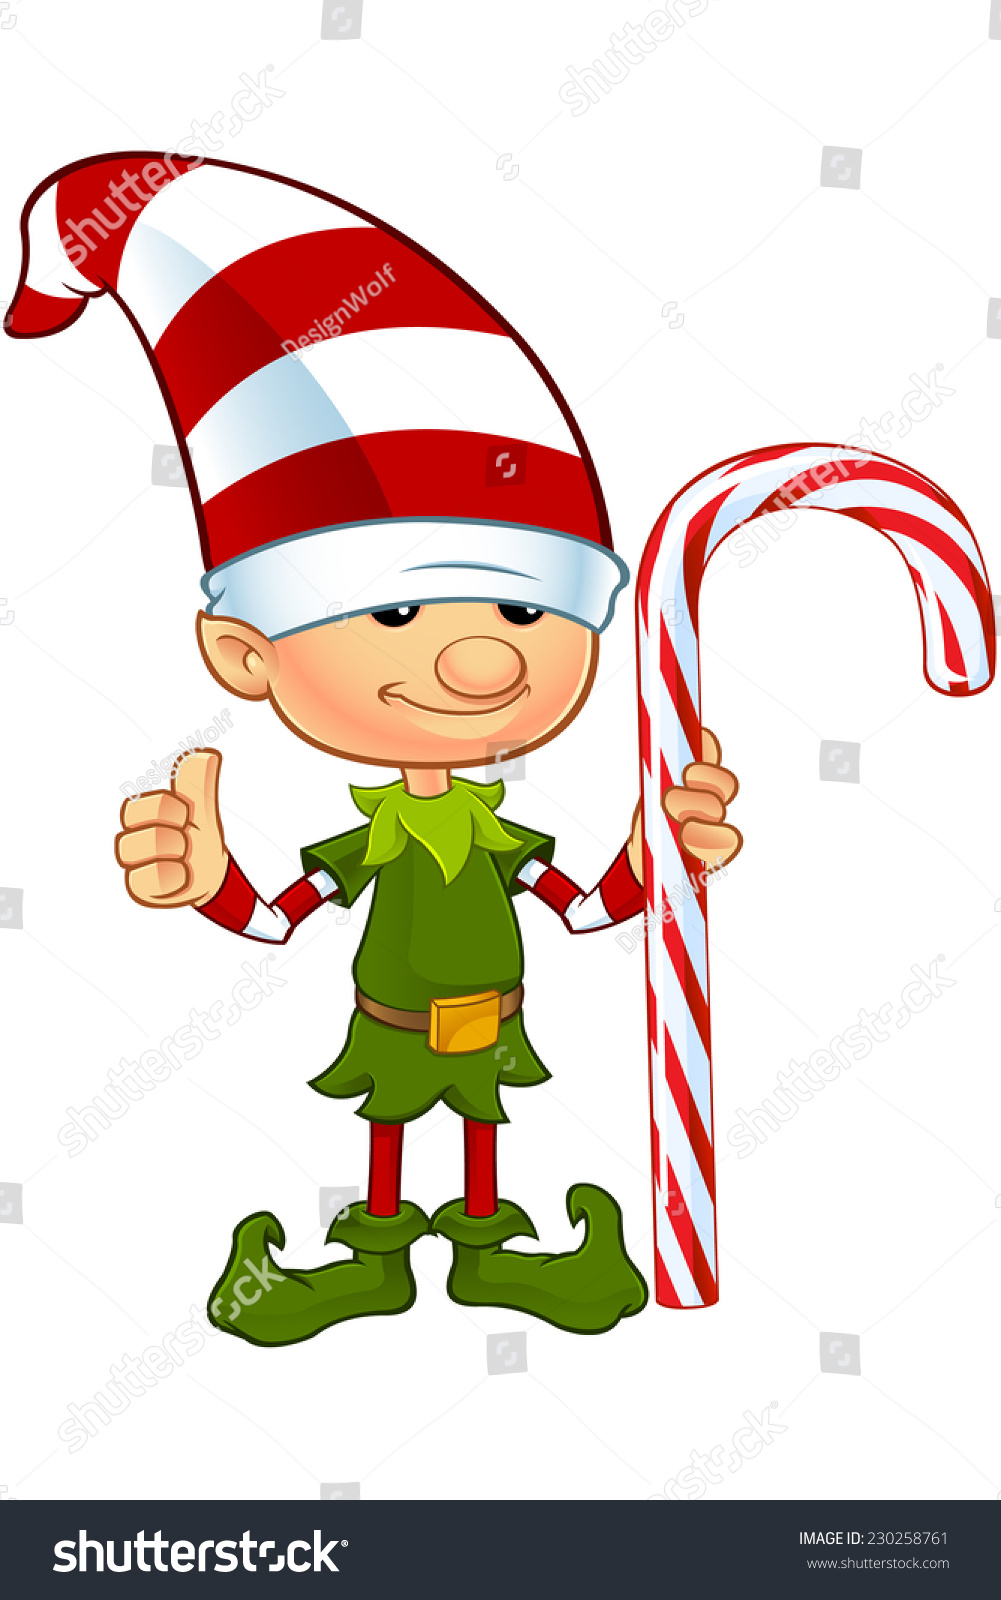 Cute Elf Character - Holding Candy Cane Stock Vector Illustration ...